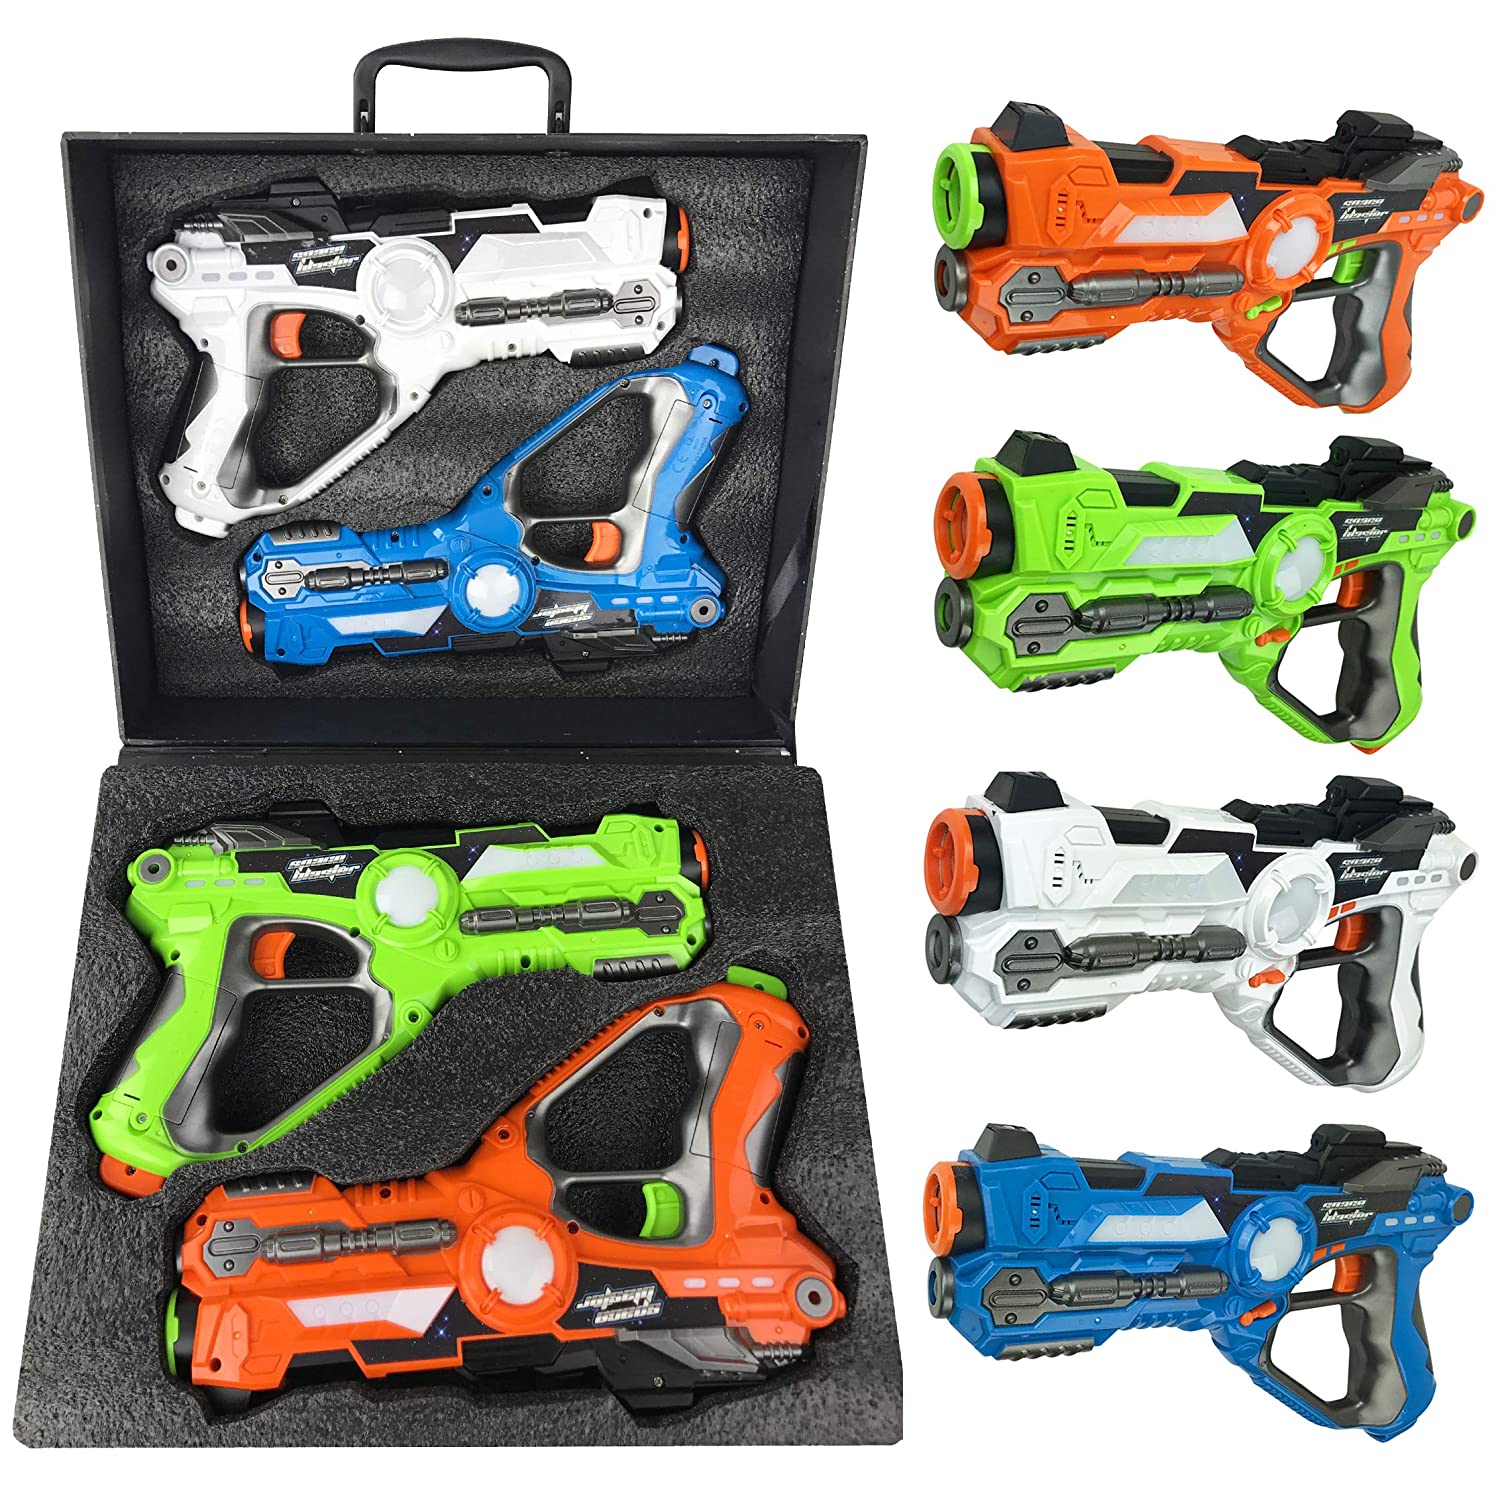 Liberty Imports Infrared Laser Tag 4 Players Game Set for Kids - Indoor Outdoor Multiplayer Toy Guns Battle Blasters Mega Pack with Carrying Case